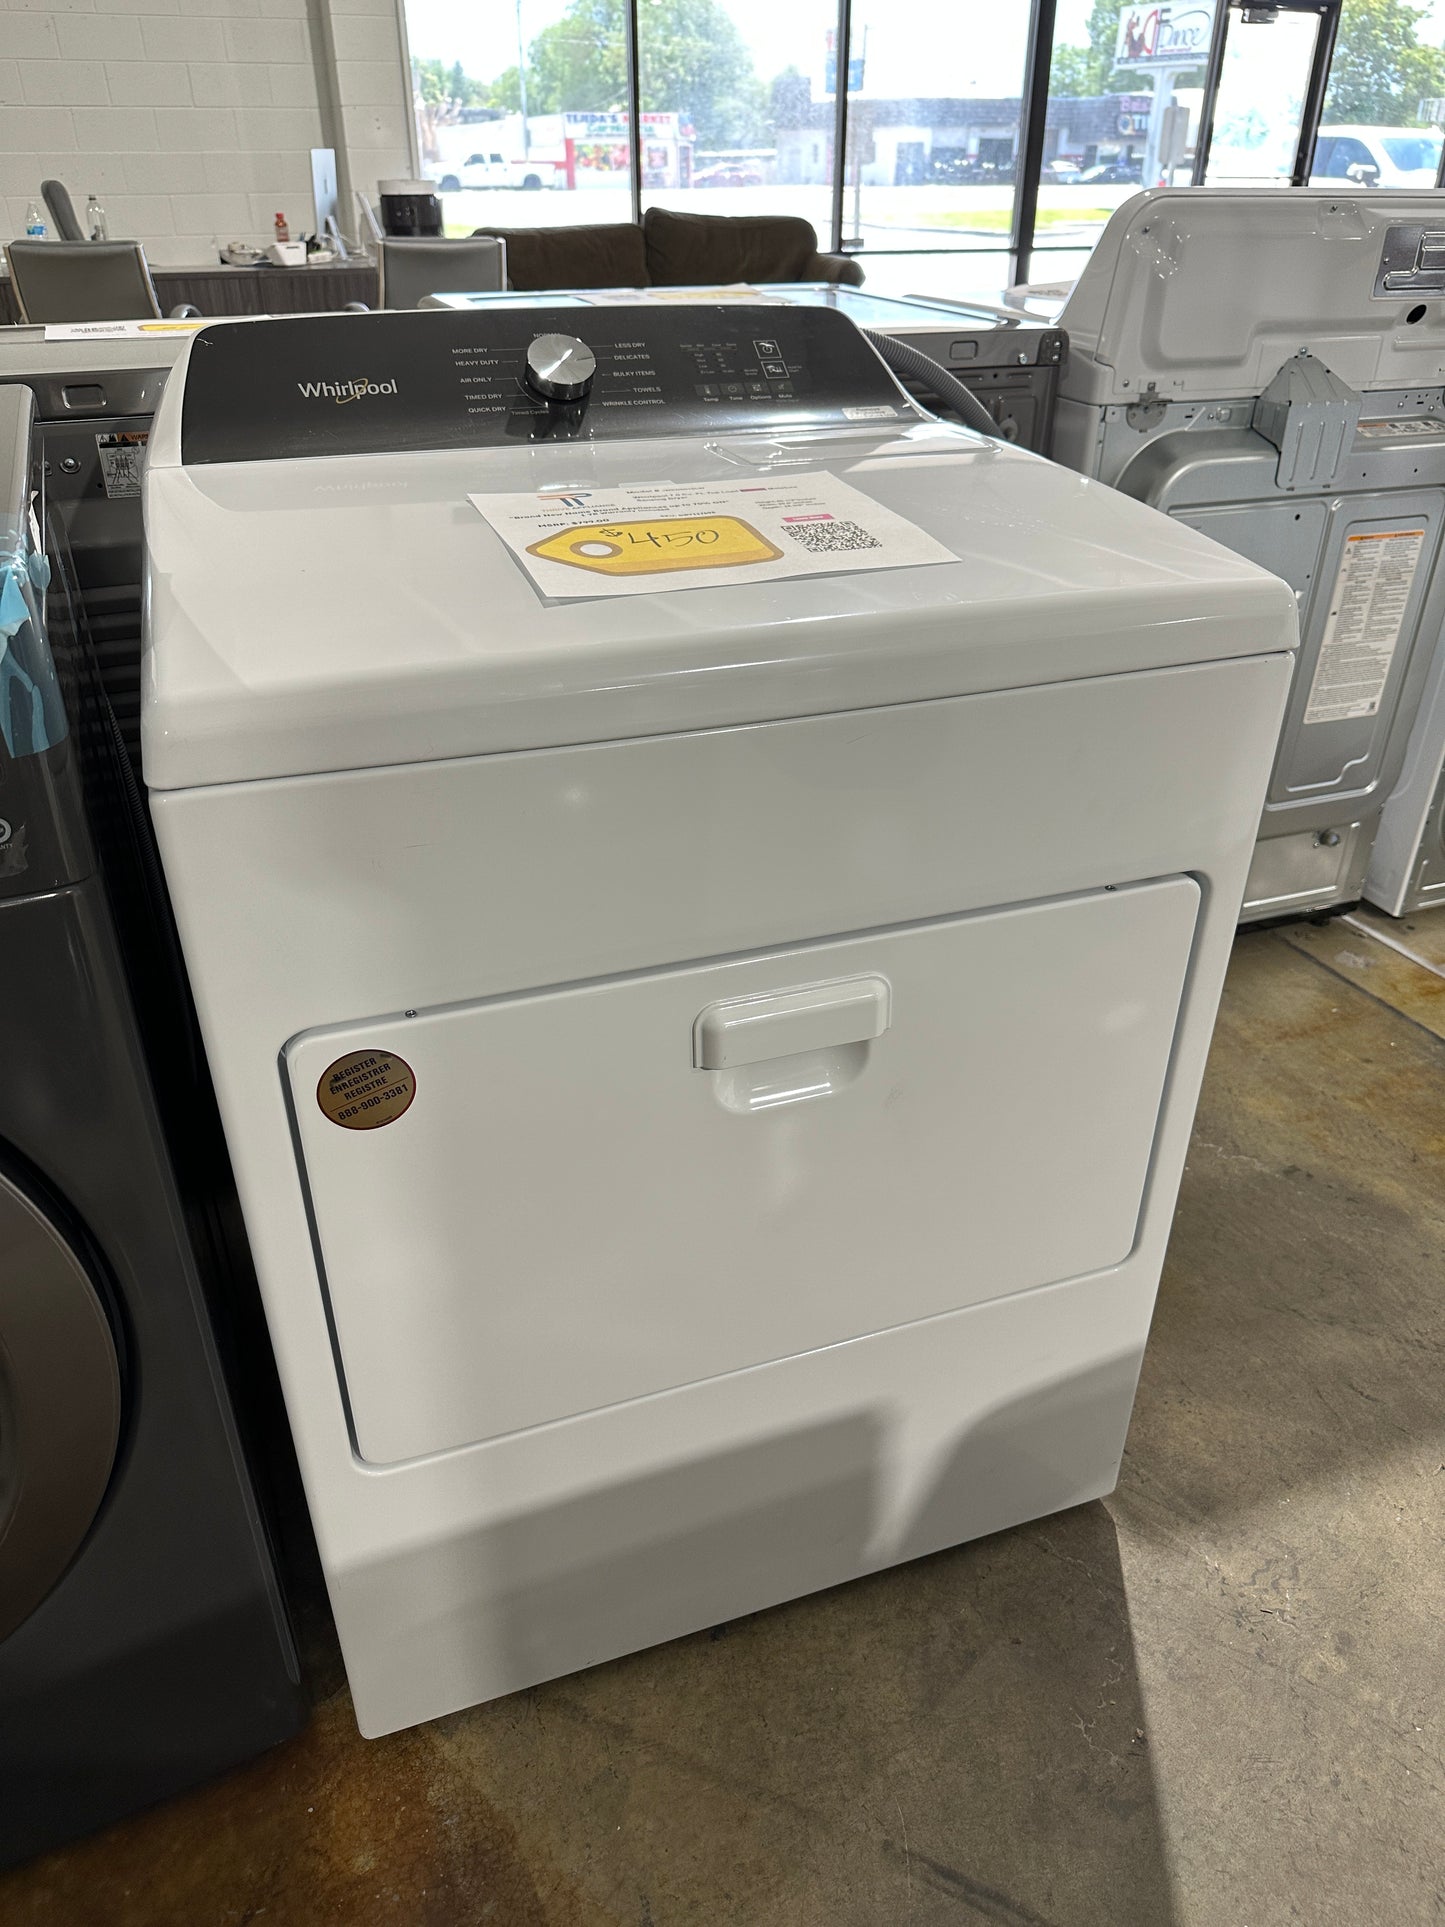 GREAT NEW WHIRLPOOL 7 CU FT ELECTRIC DRYER Model:WED5010LW  DRY11769S